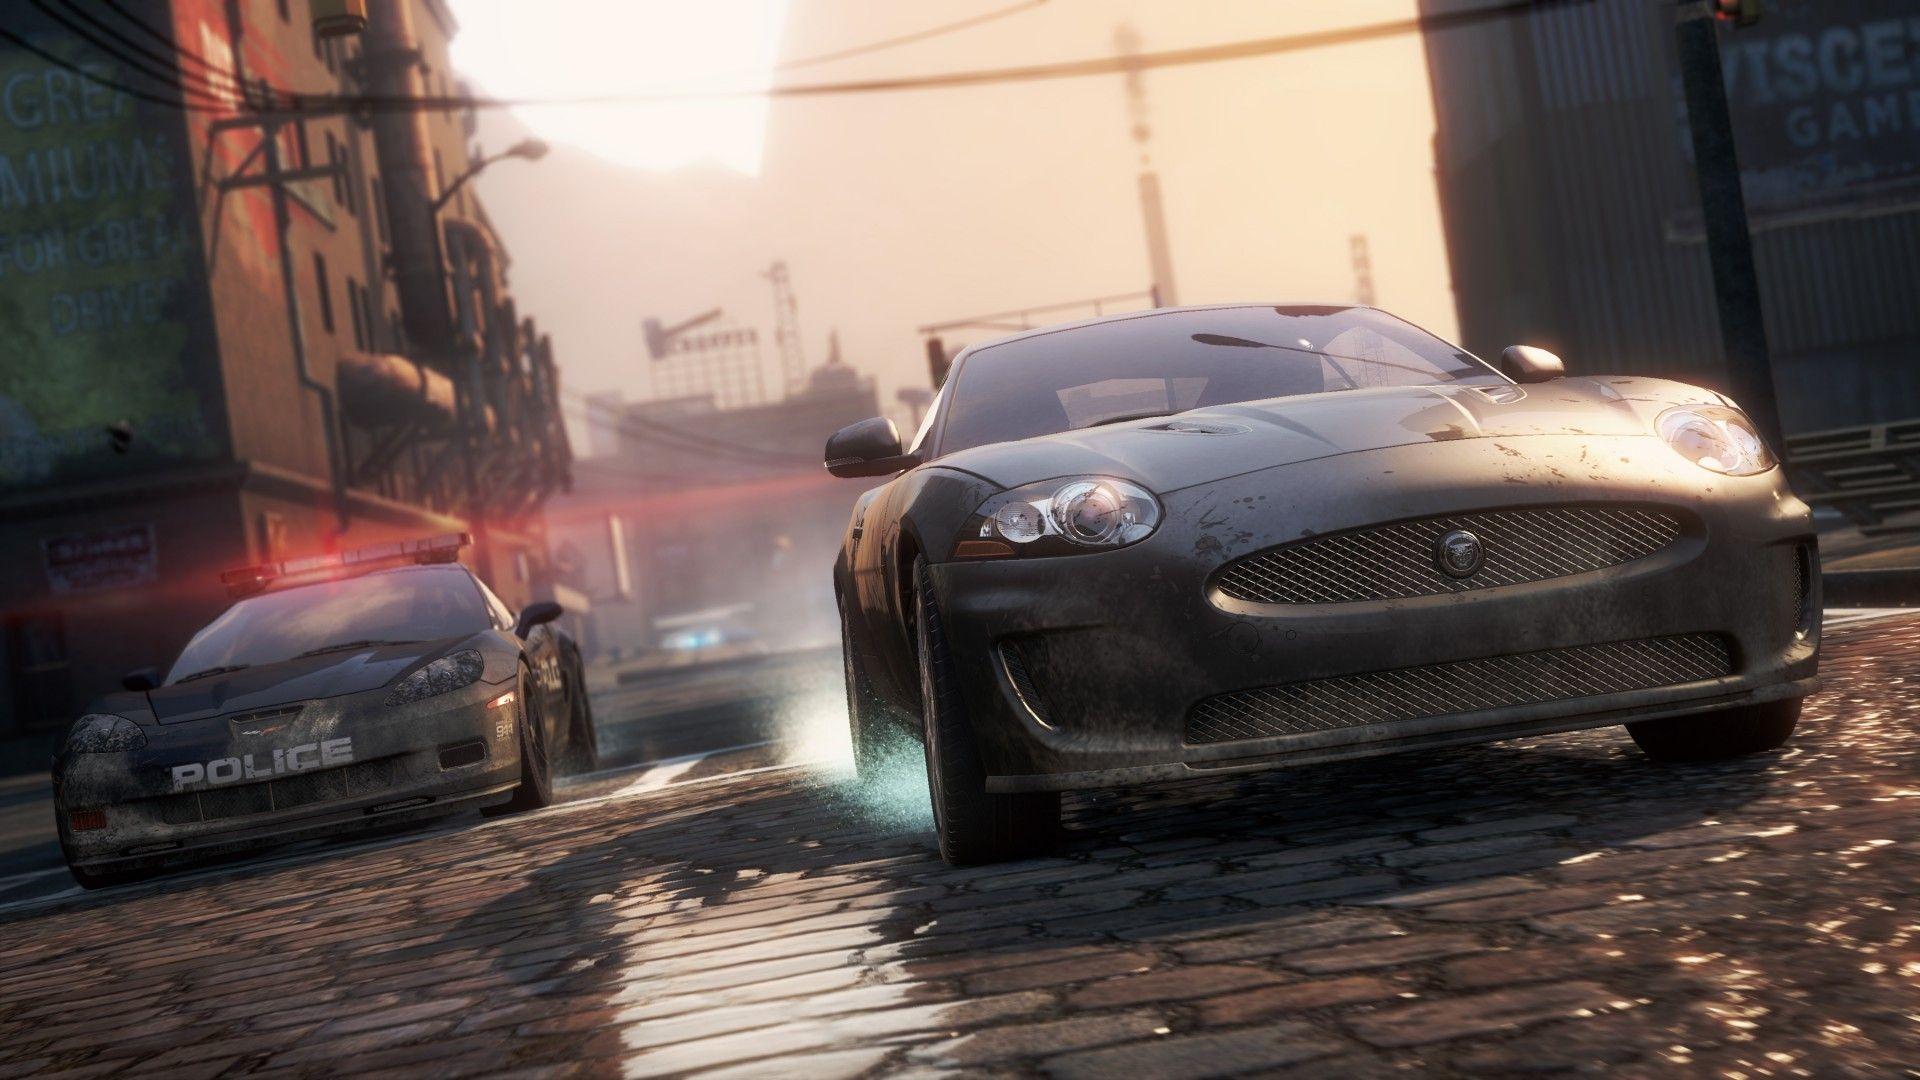 Need for speed most wanted 2 Full HD Wallpaper and Background